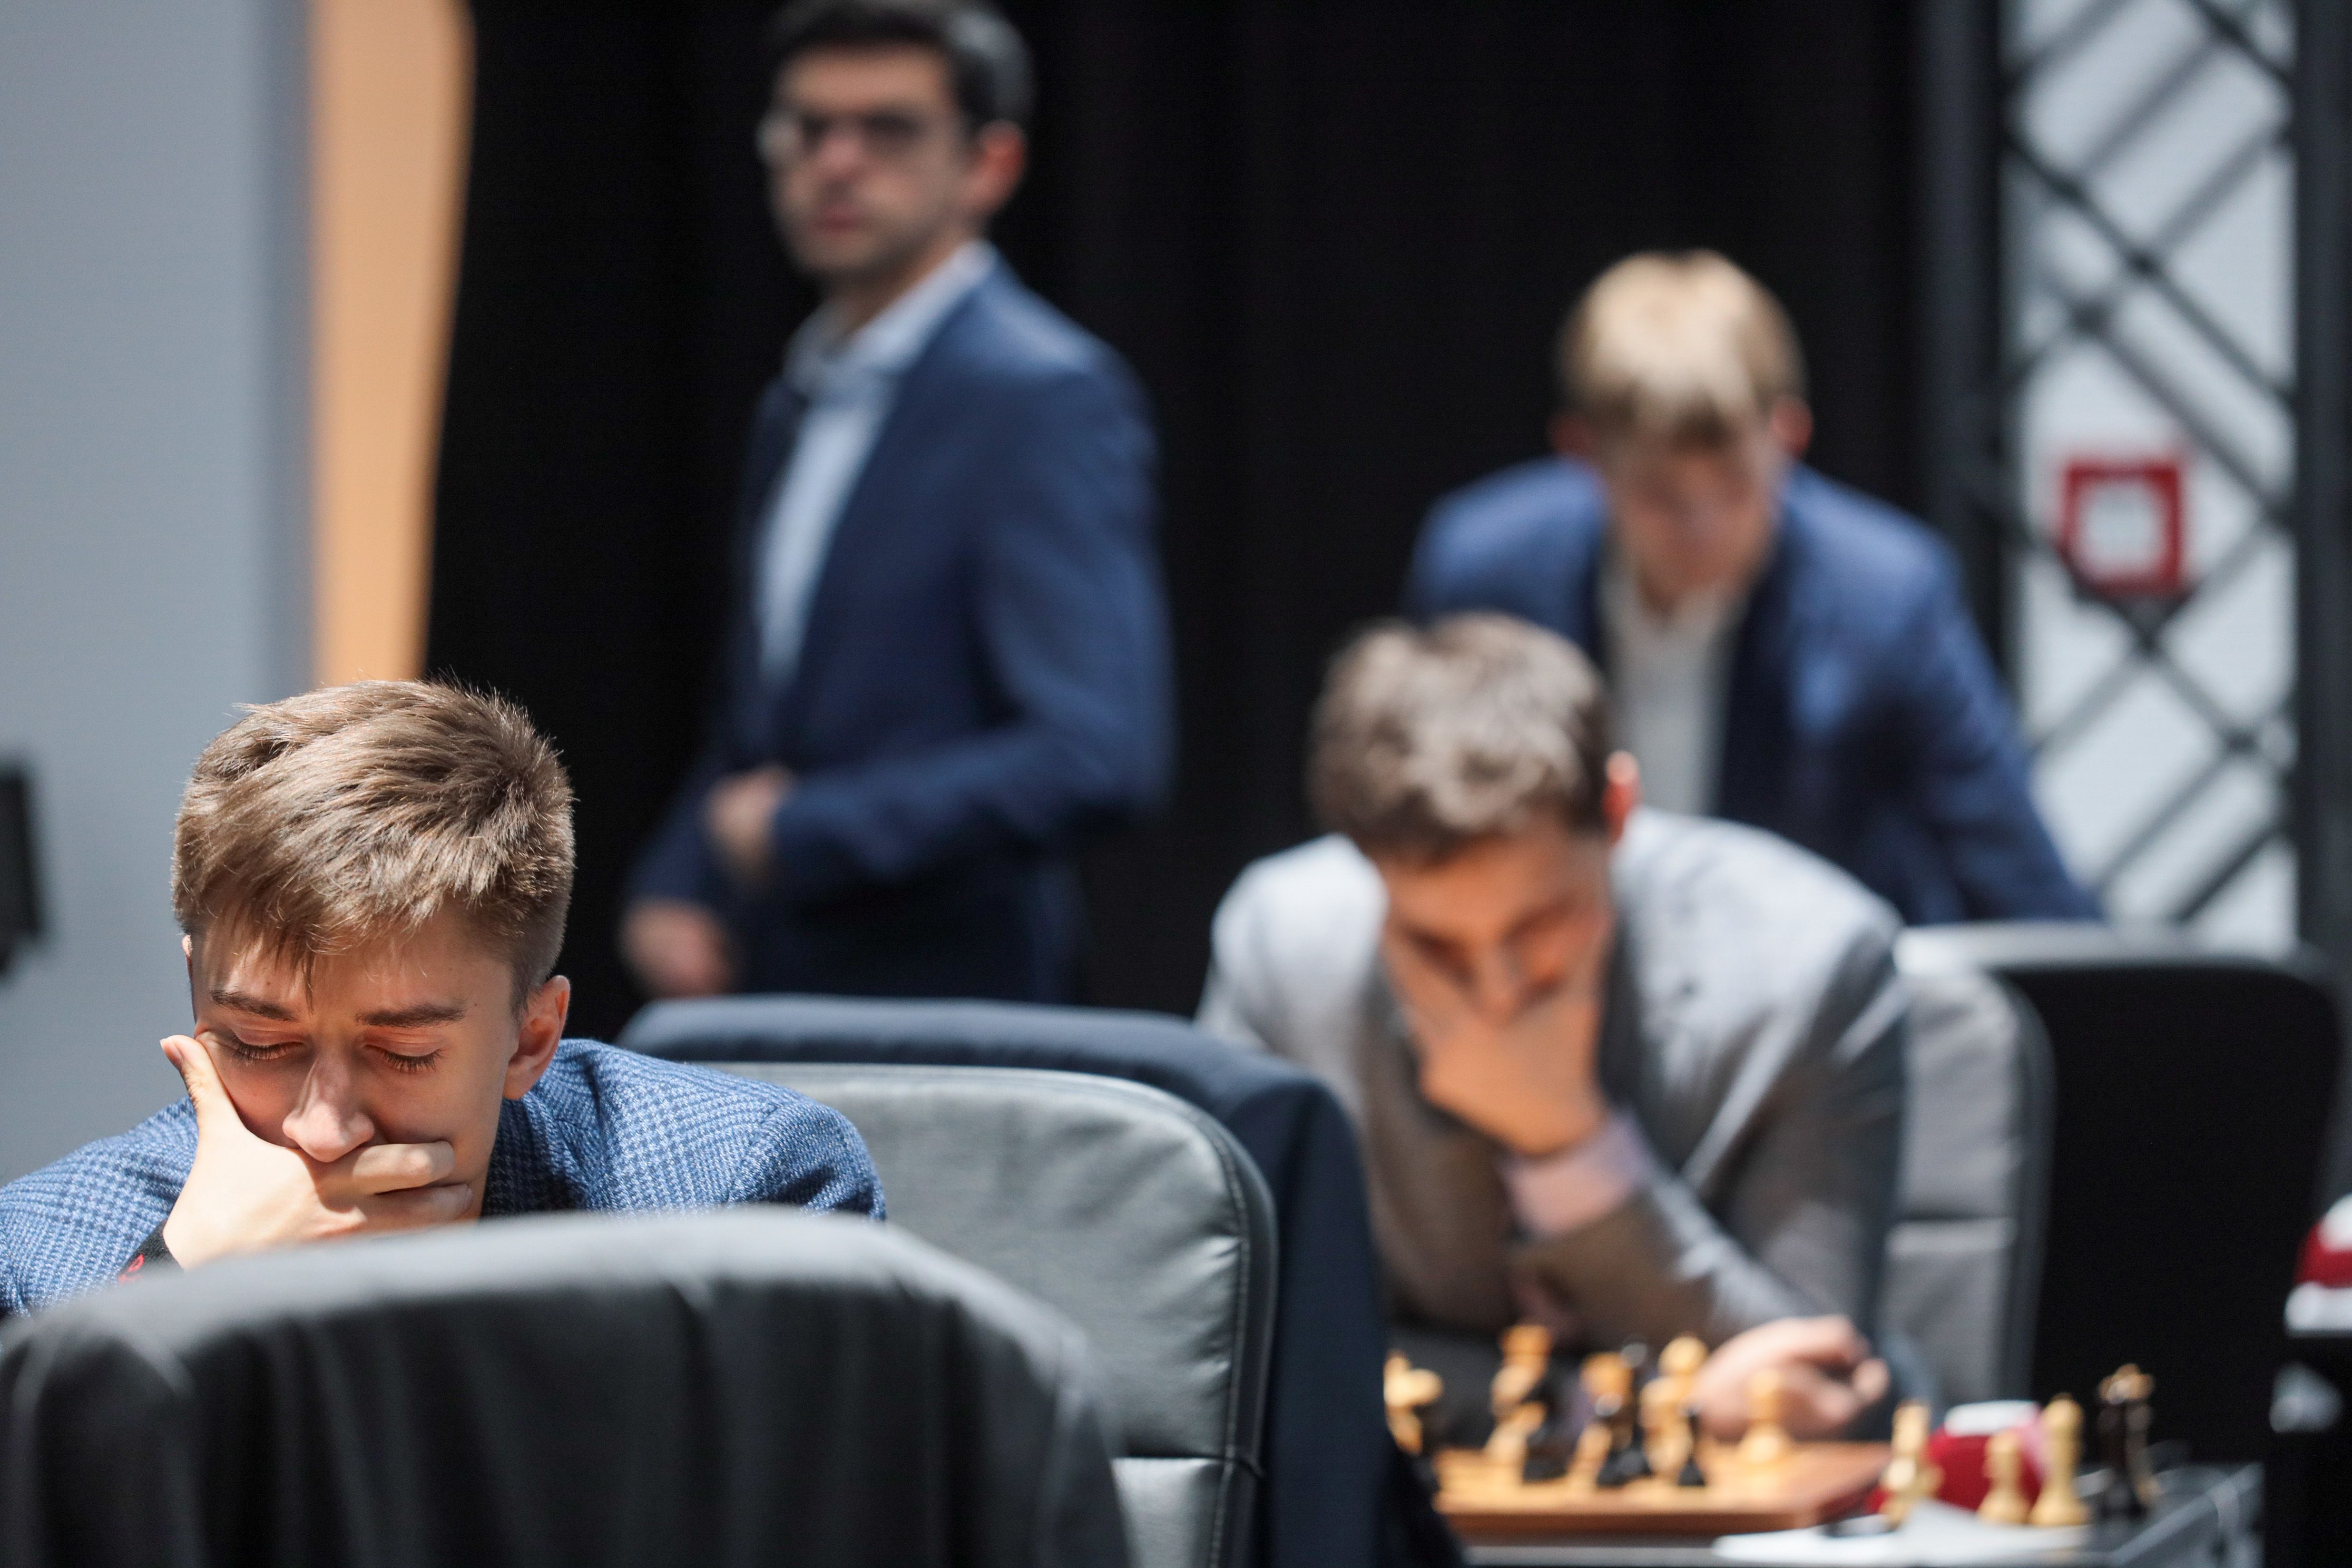 Grandmaster Levon Aronian Wins FIDE Chess World Cup for the Second Time -  PeopleOfAr